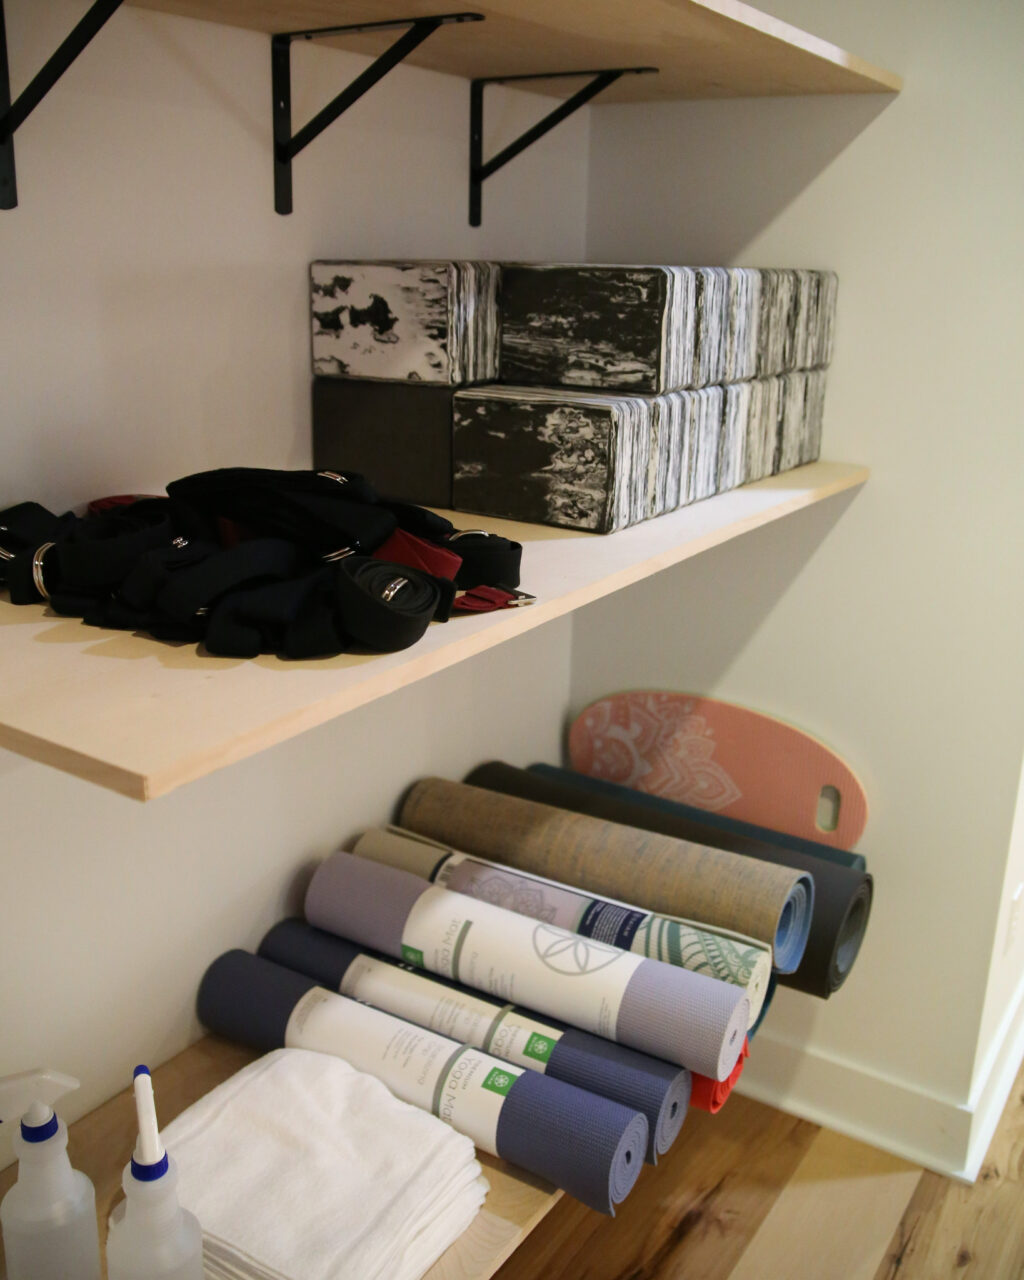 A photo of yoga mats, blocks, straps, and other items that students can borrow for class